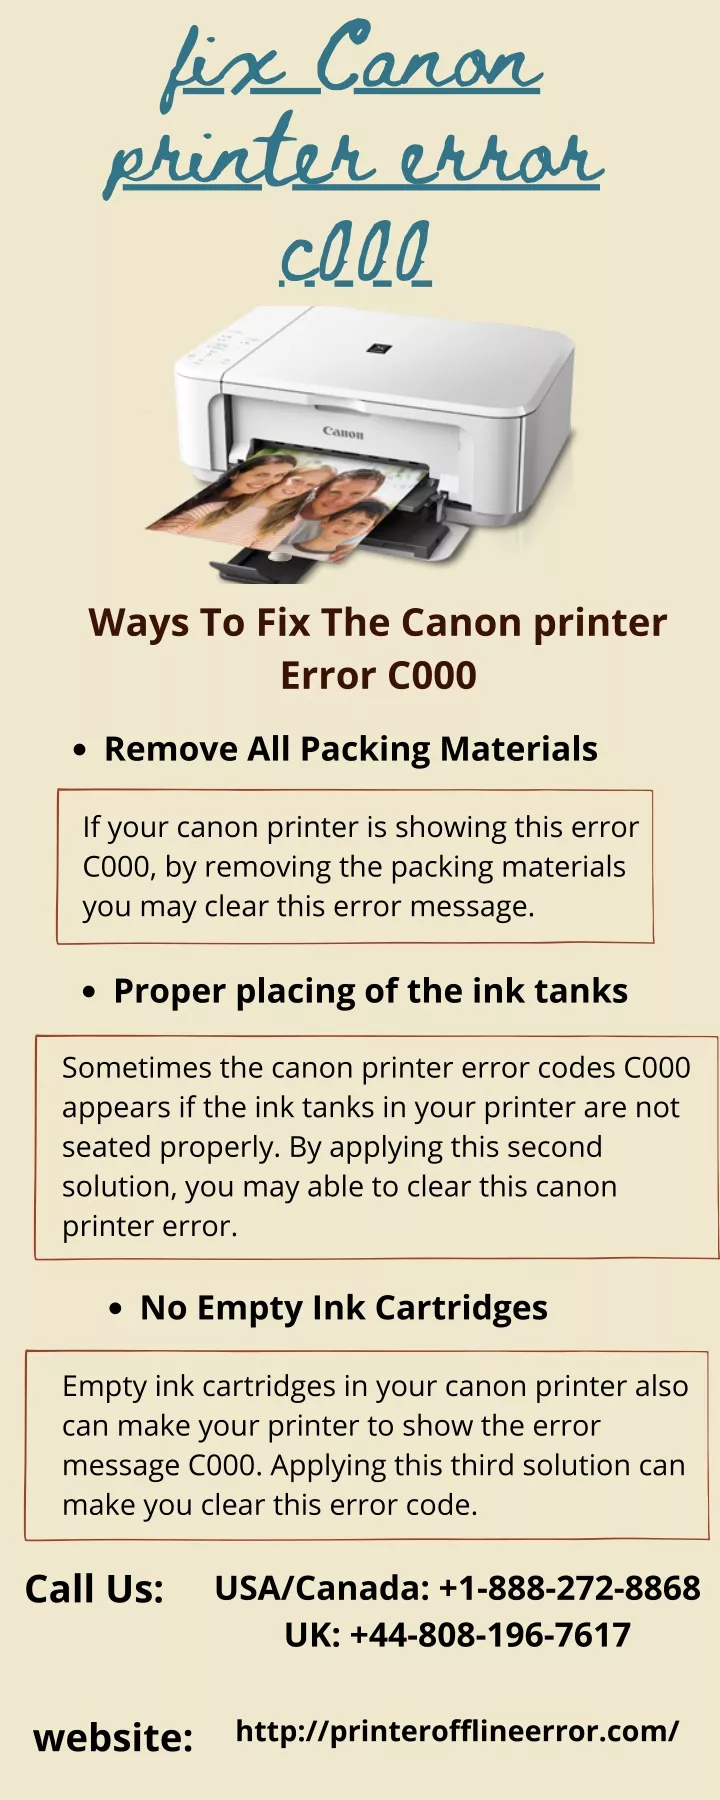 Ppt Guide To Fix Canon Printer Error C000 Powerpoint Presentation Free Download Id10801581 7086